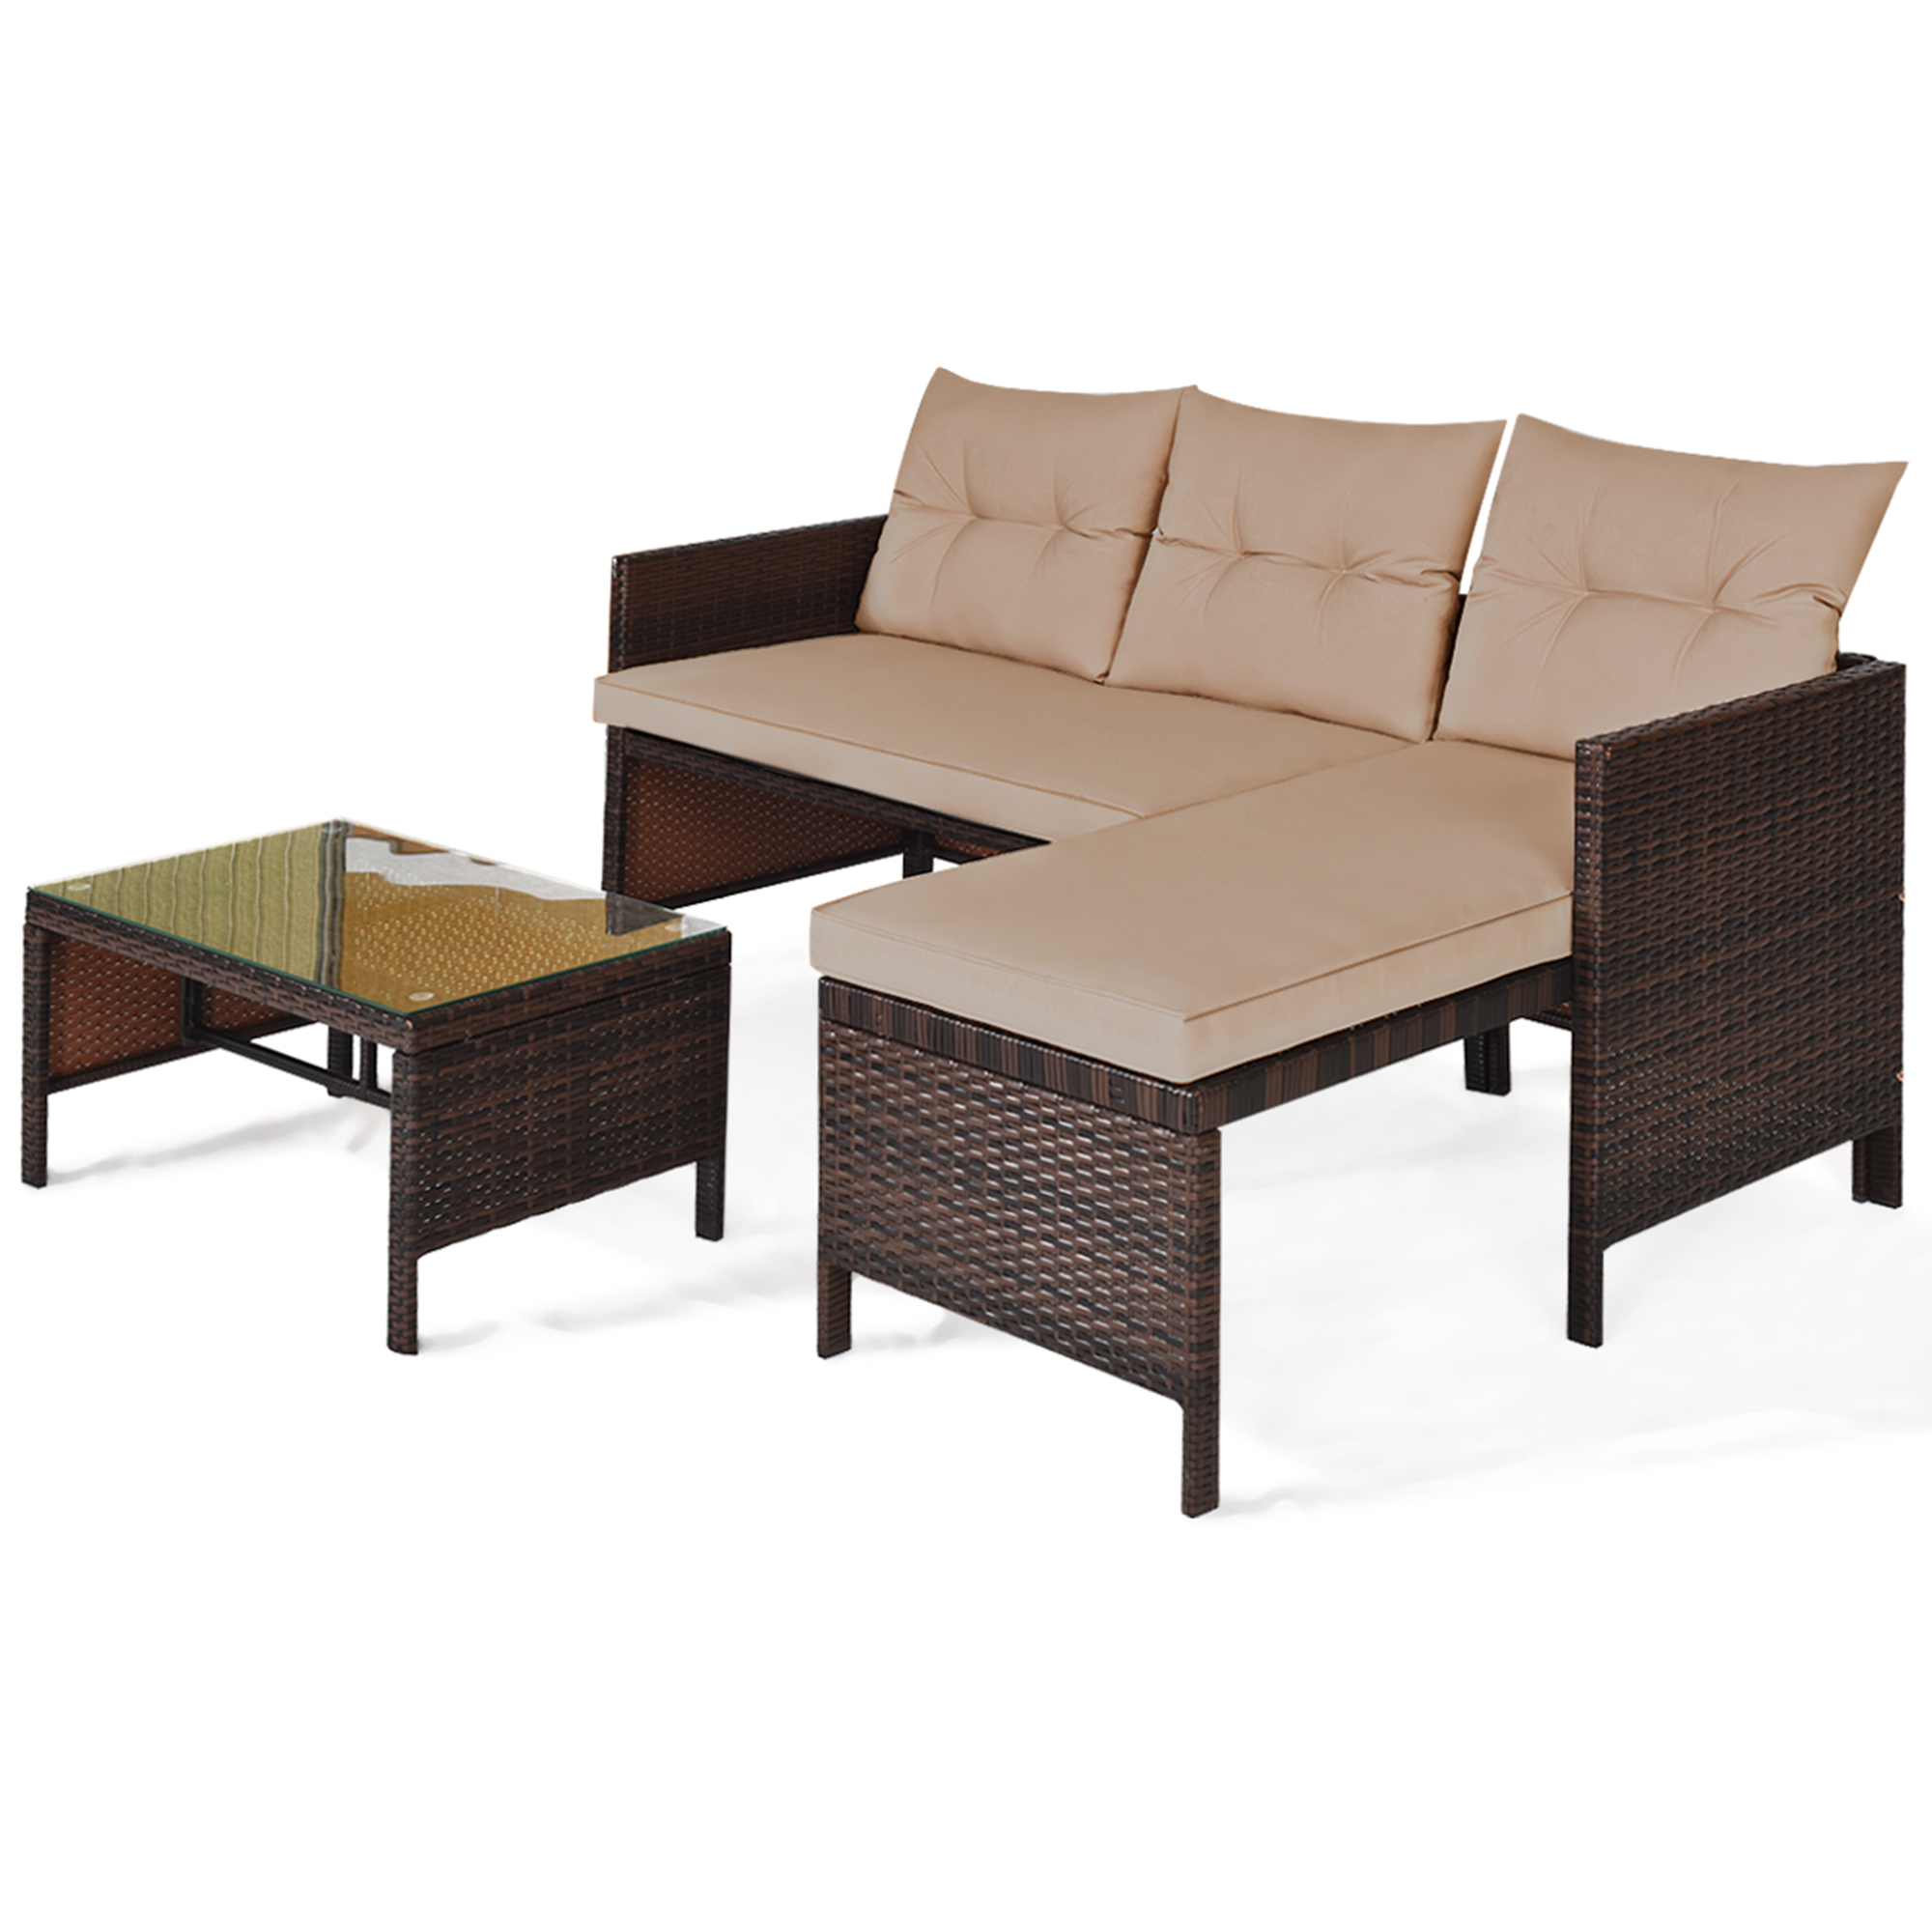 Gymax 3PCS Outdoor Rattan Furniture Set Patio Couch Sofa Set w/ Coffee Table - image 5 of 10